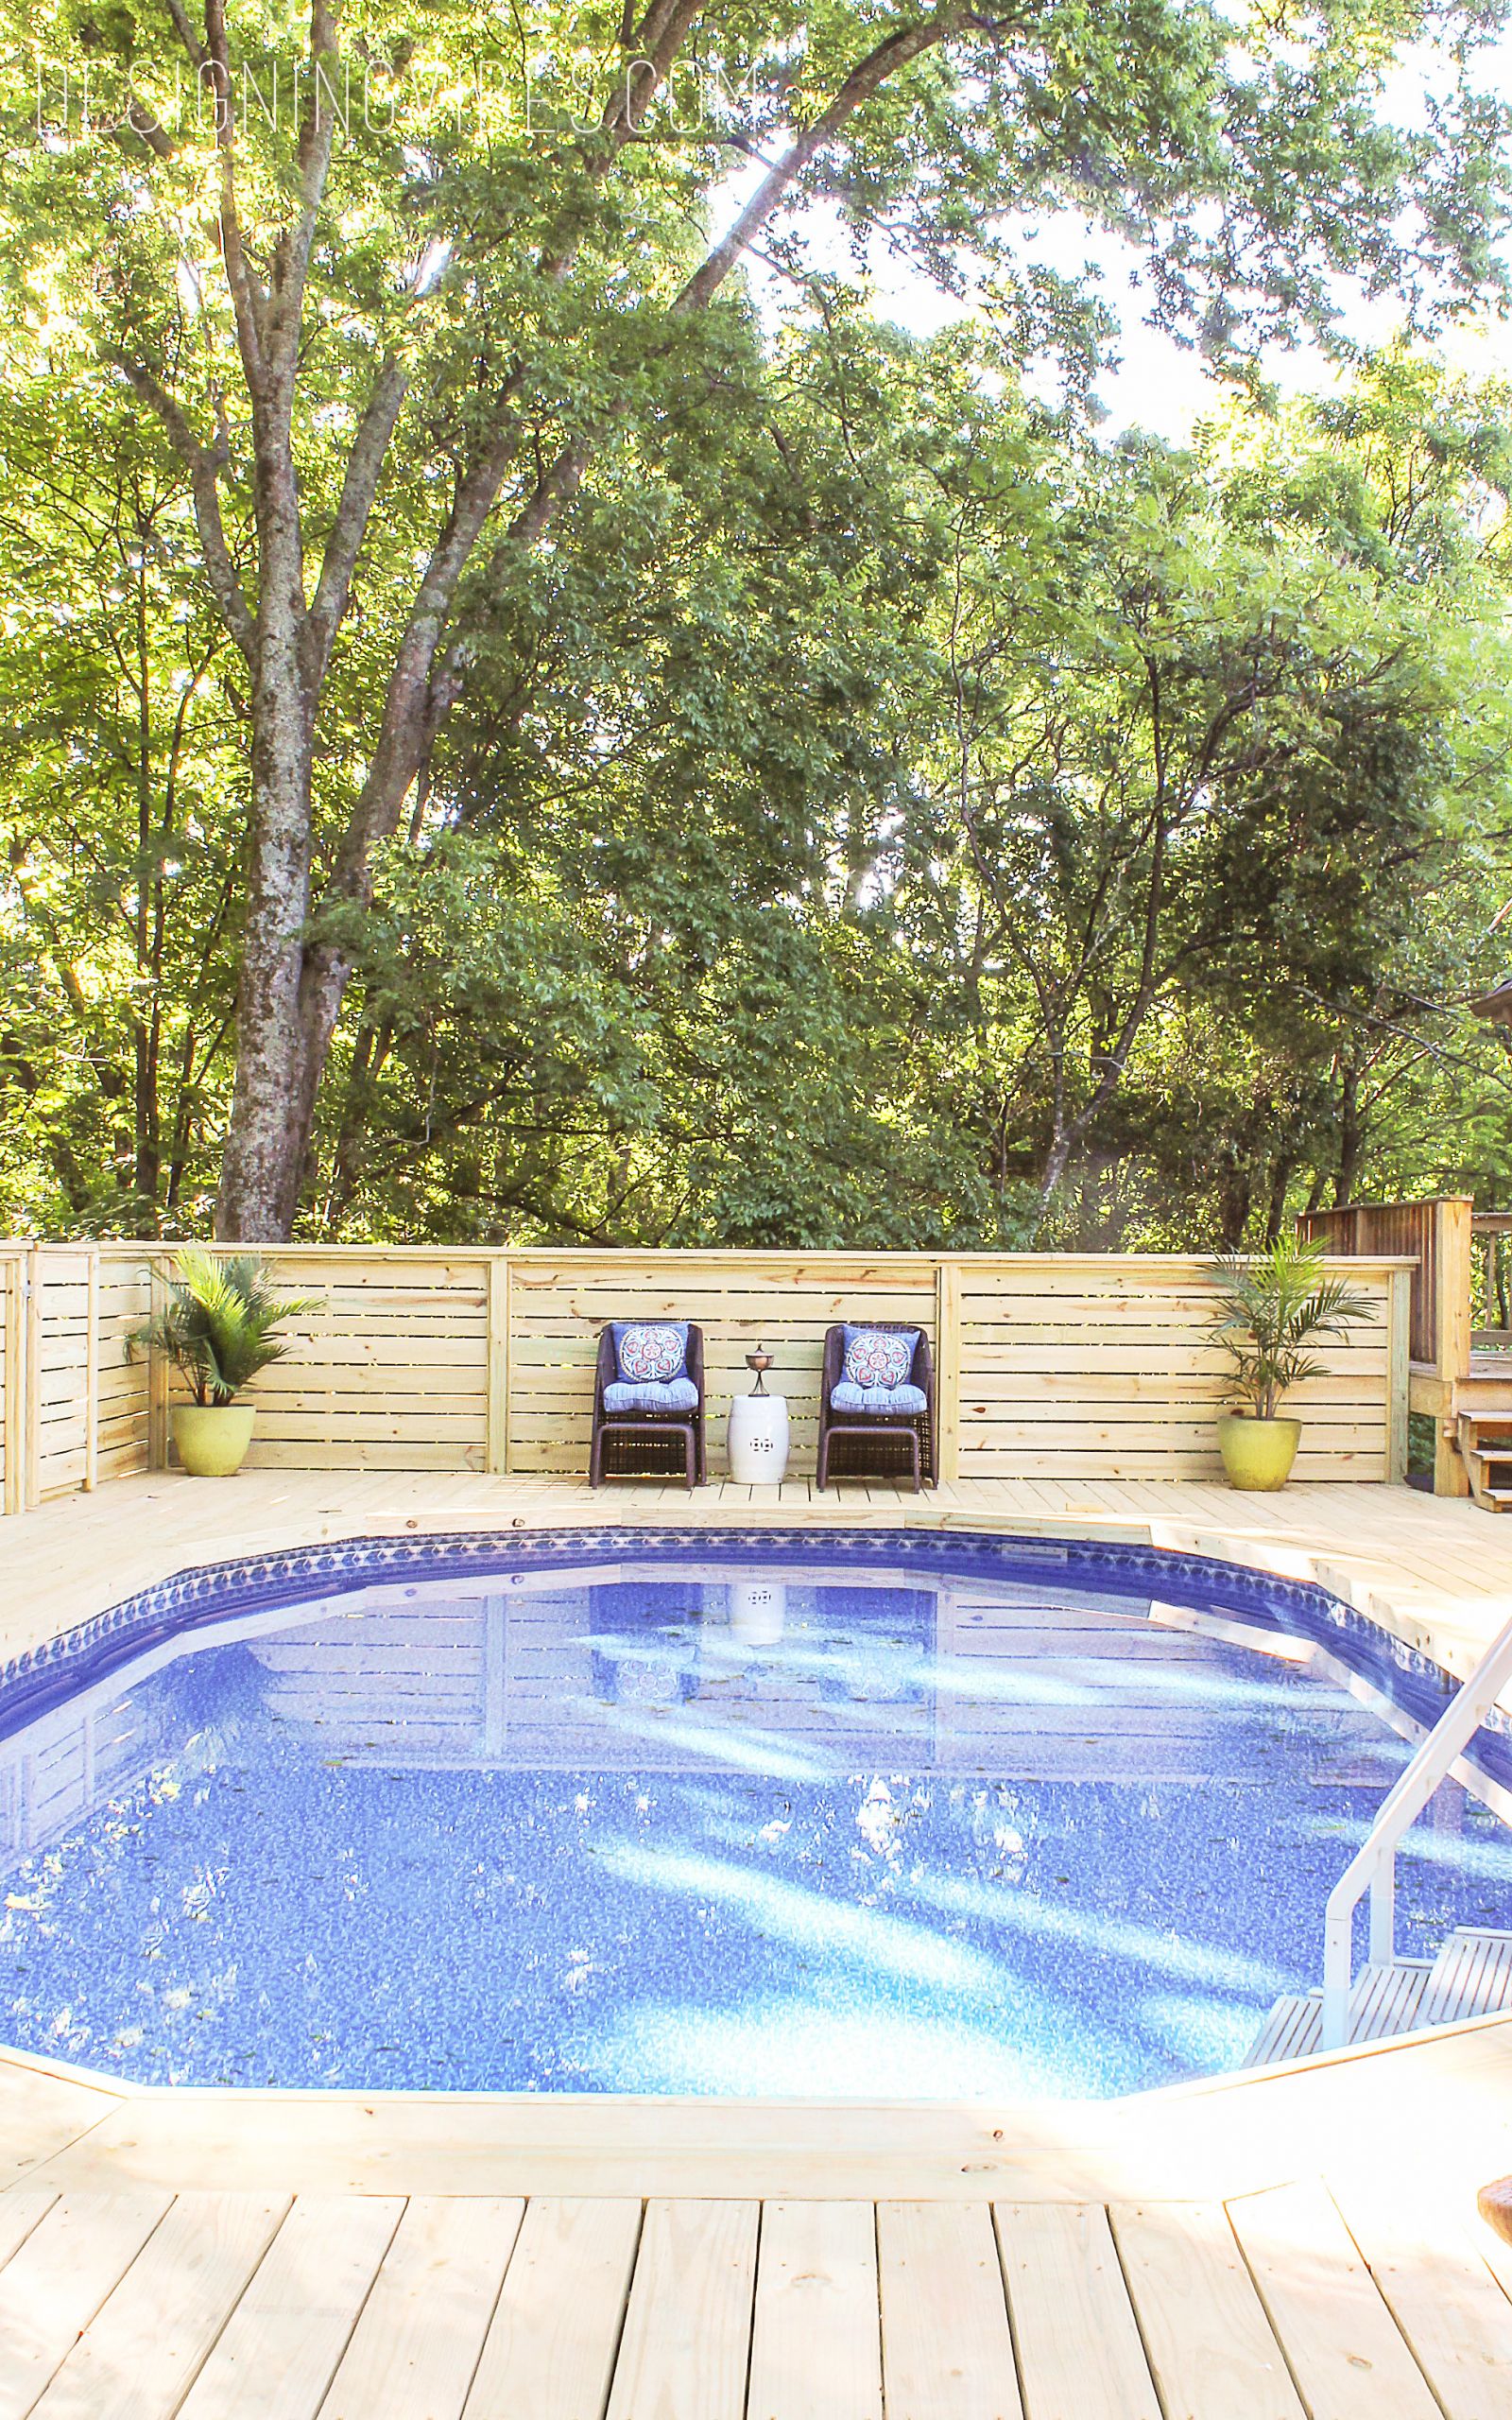 Image Of Above Ground Pool
 How to Make an Ground Pool Look Inground Pool Deck